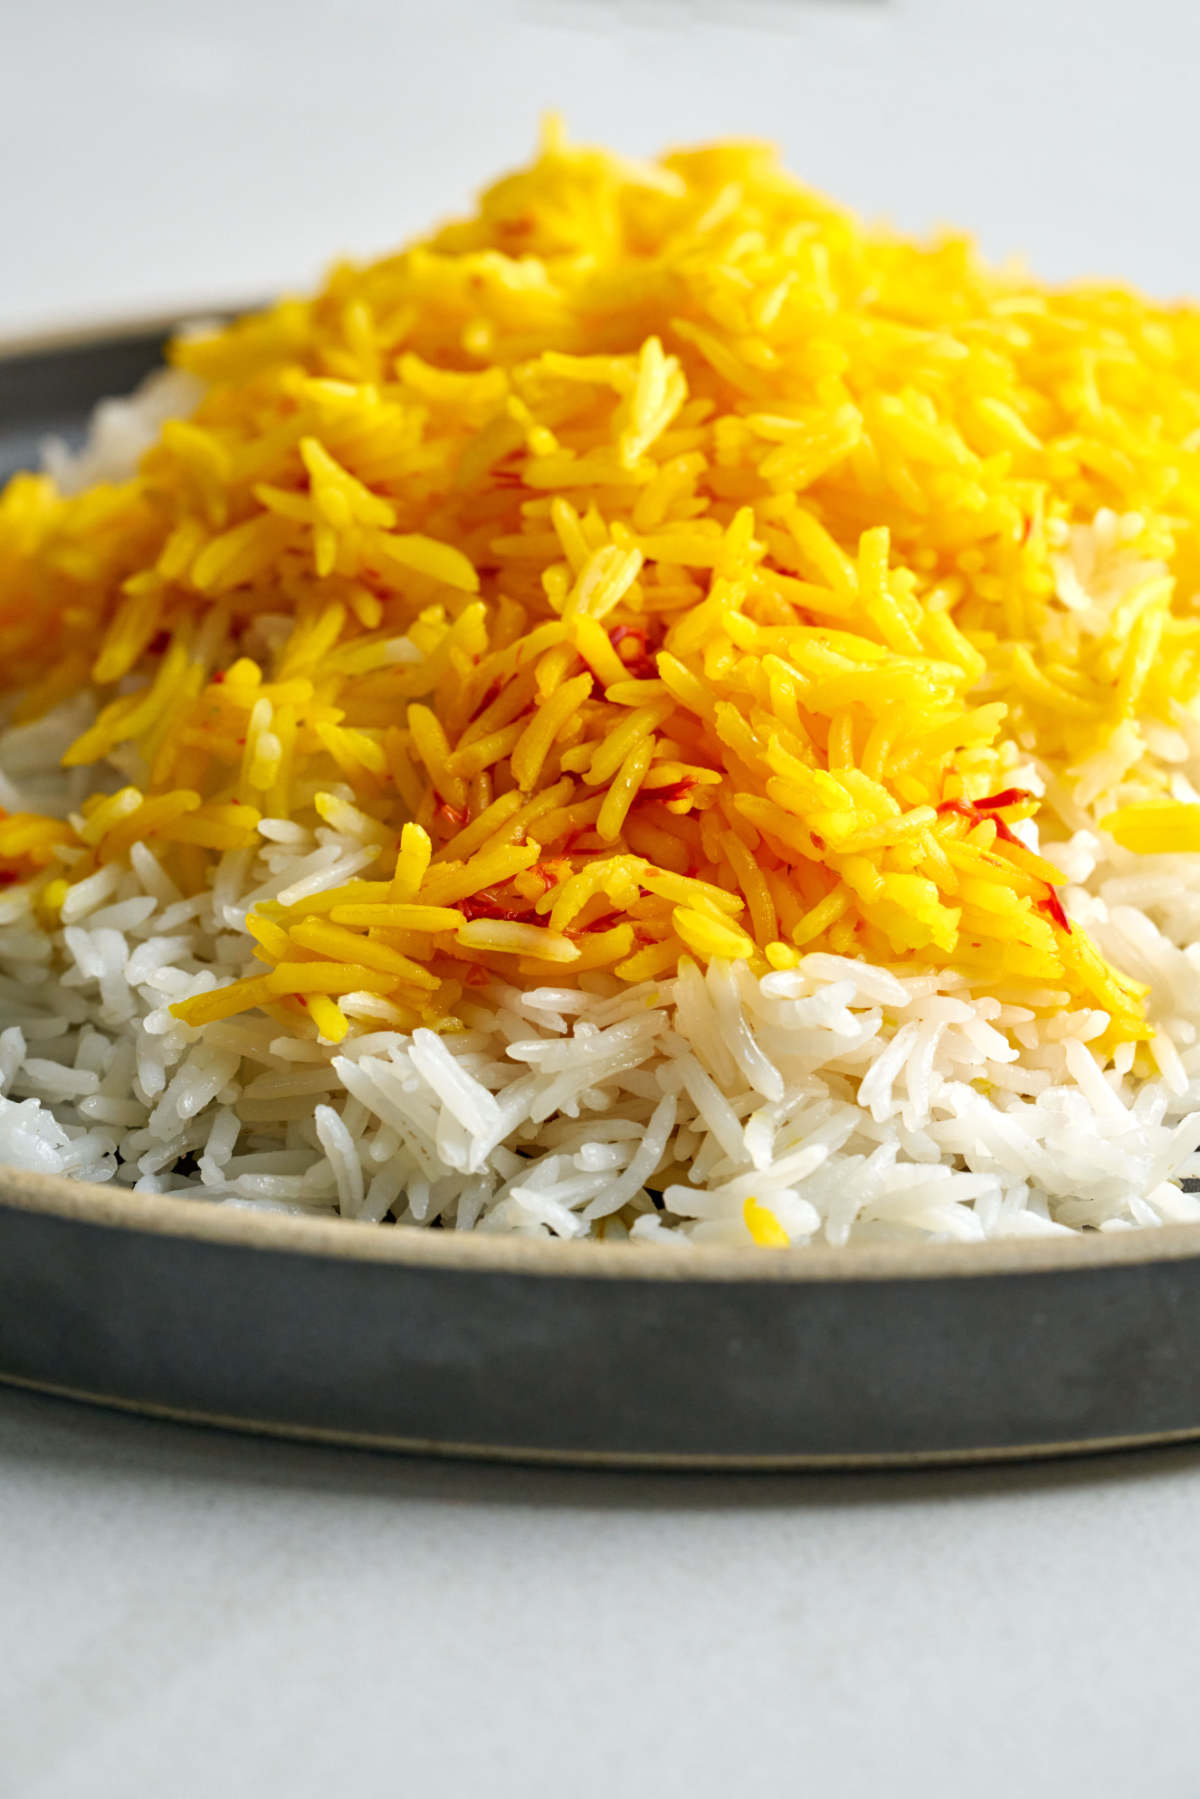 How To Make Persian Rice Using a Rice Cooker